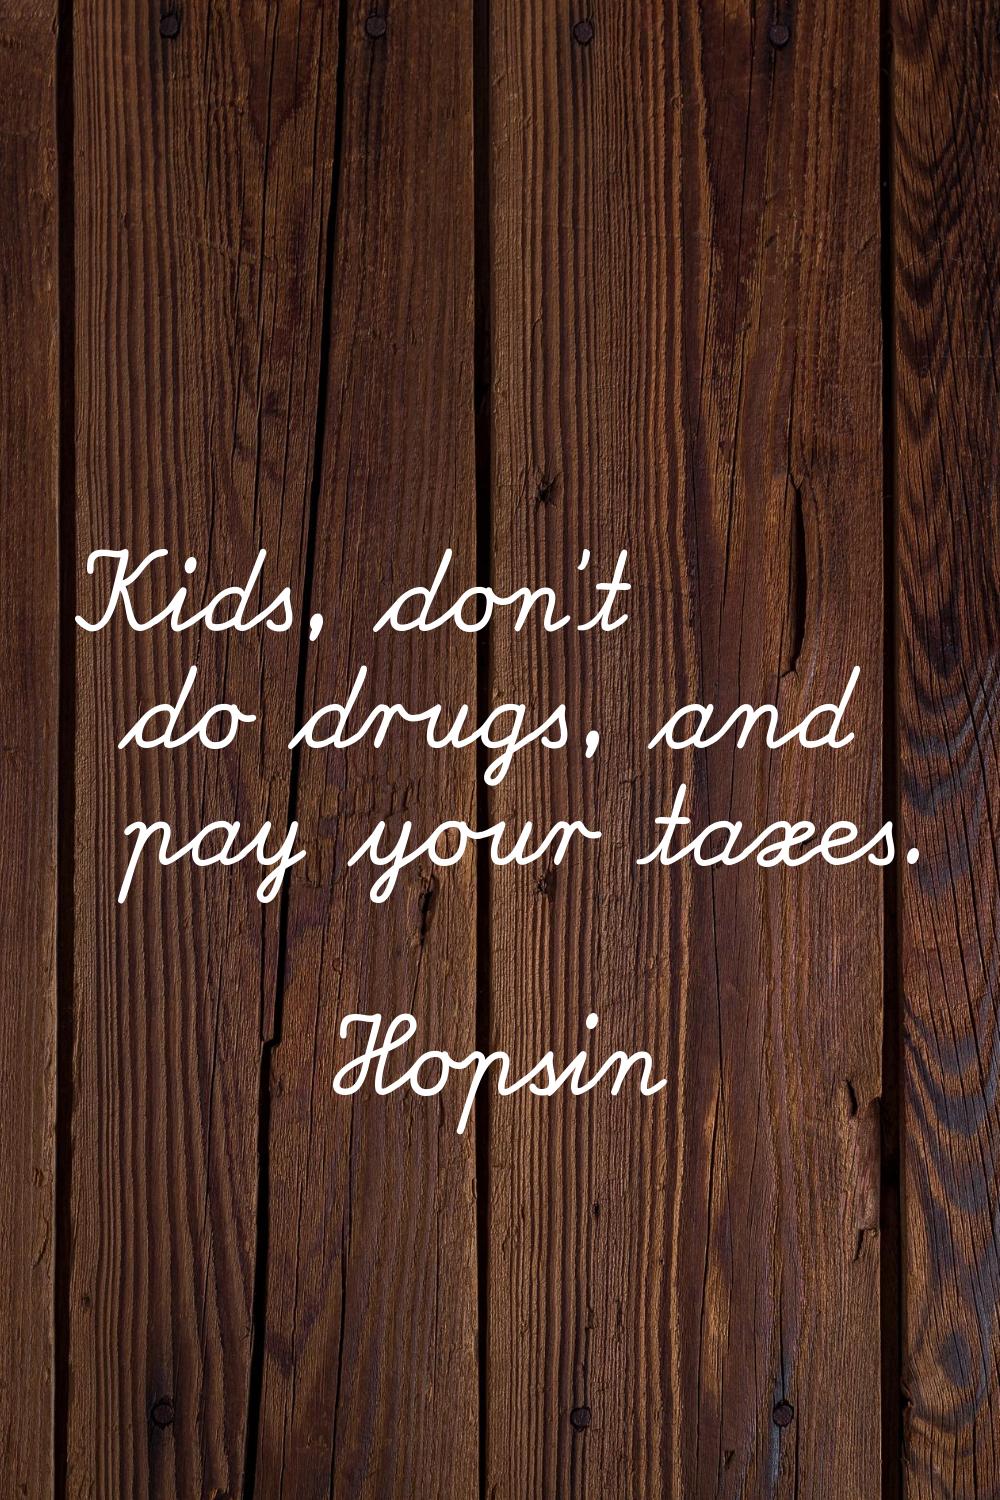 Kids, don't do drugs, and pay your taxes.